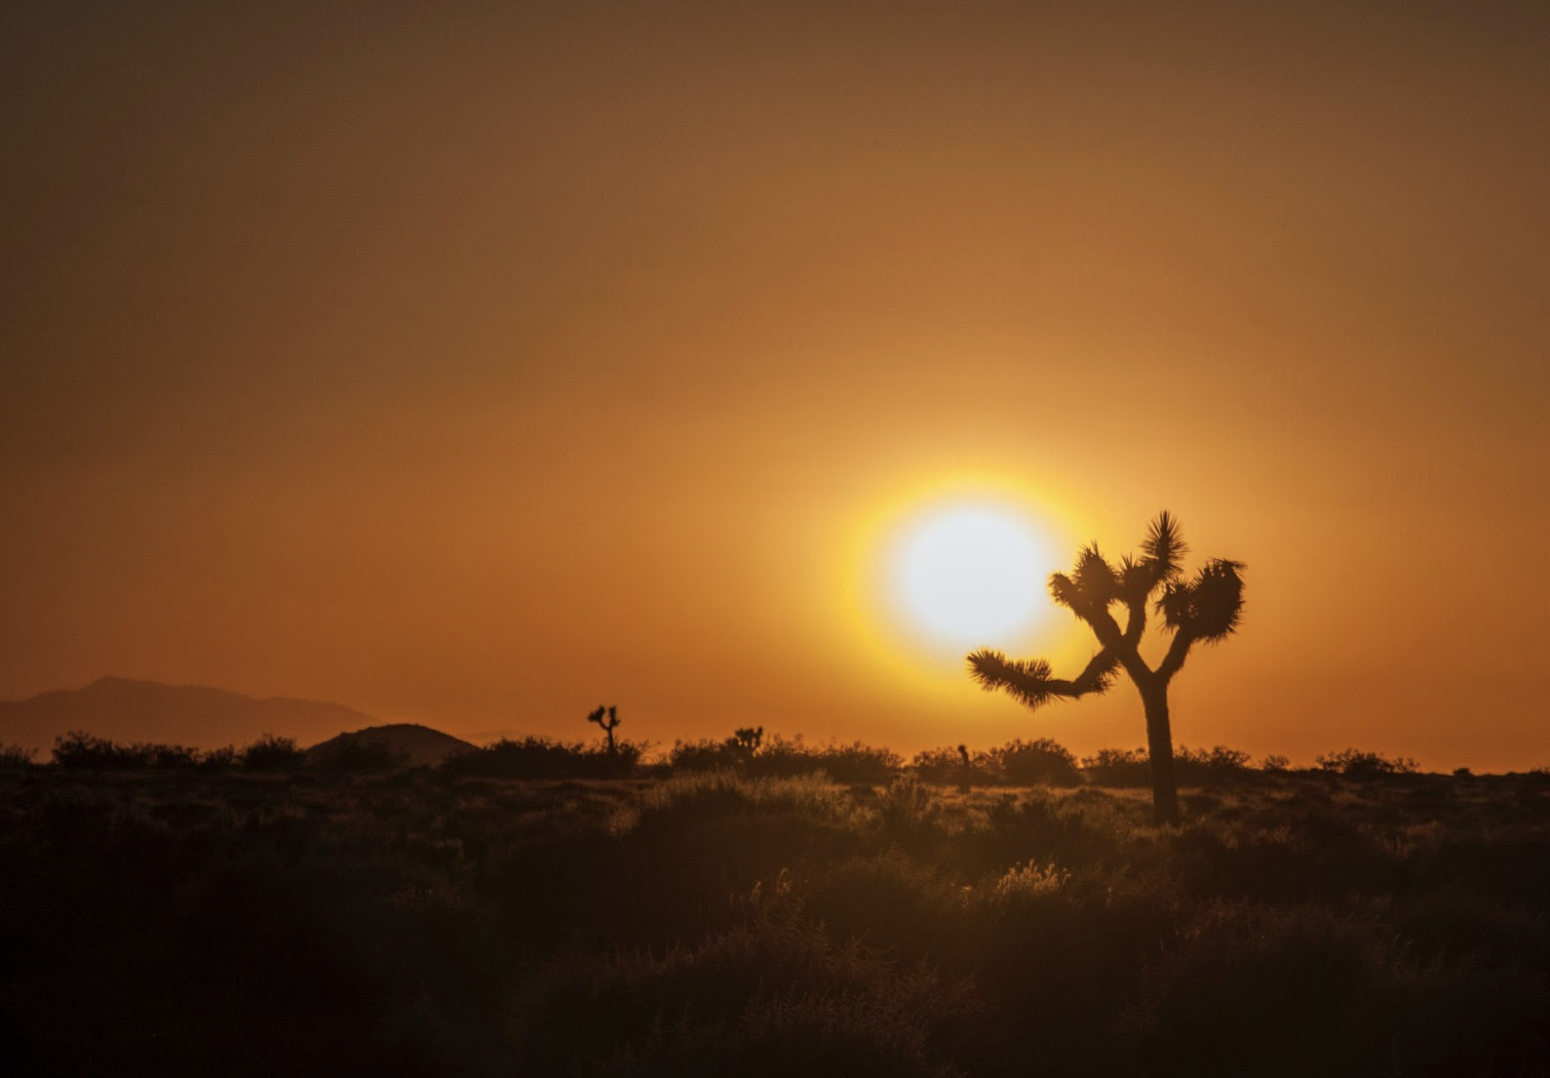 Setting sun in the desert, orange and black colors. There is a silhouette of a cactus in the right bottom section of sun and the cactus follow's the sun's curvature